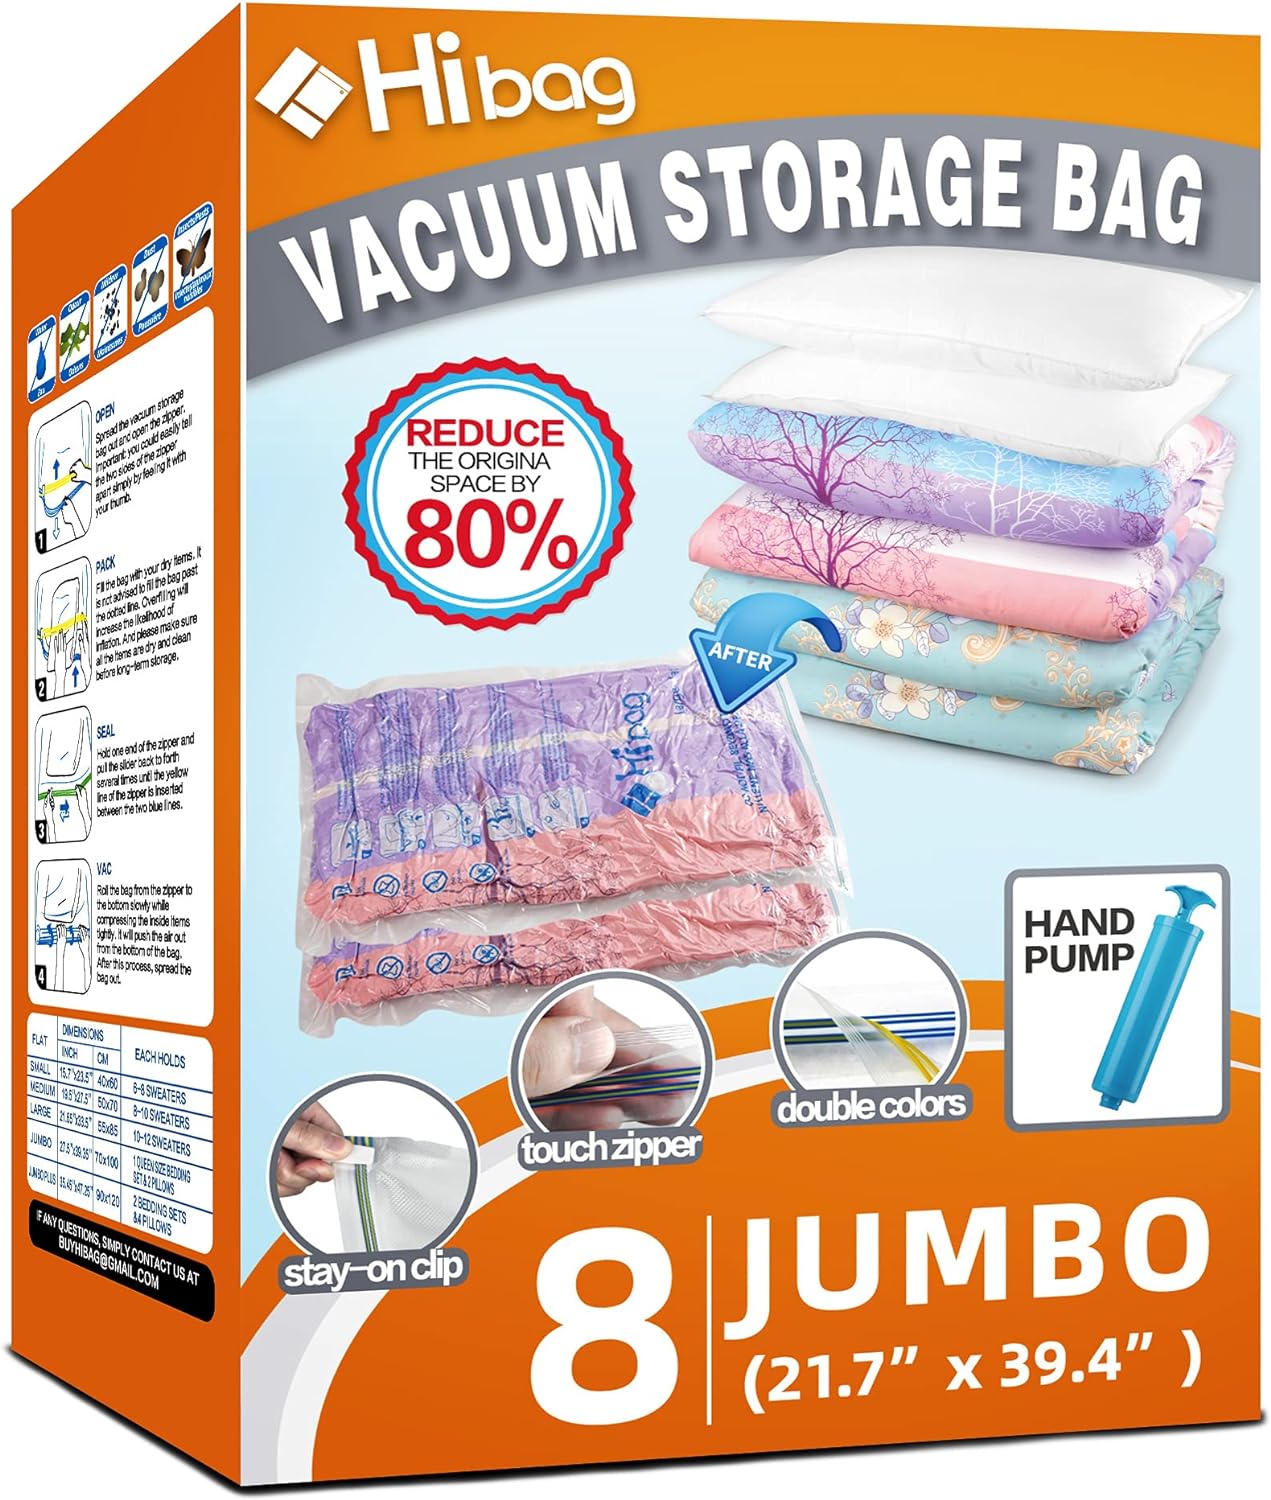 8 Jumbo Space Saver Bags, Vacuum Storage Bags for Clothes, Clothing, Comforter and Blanket Hand-Pump (8-Jumbo)